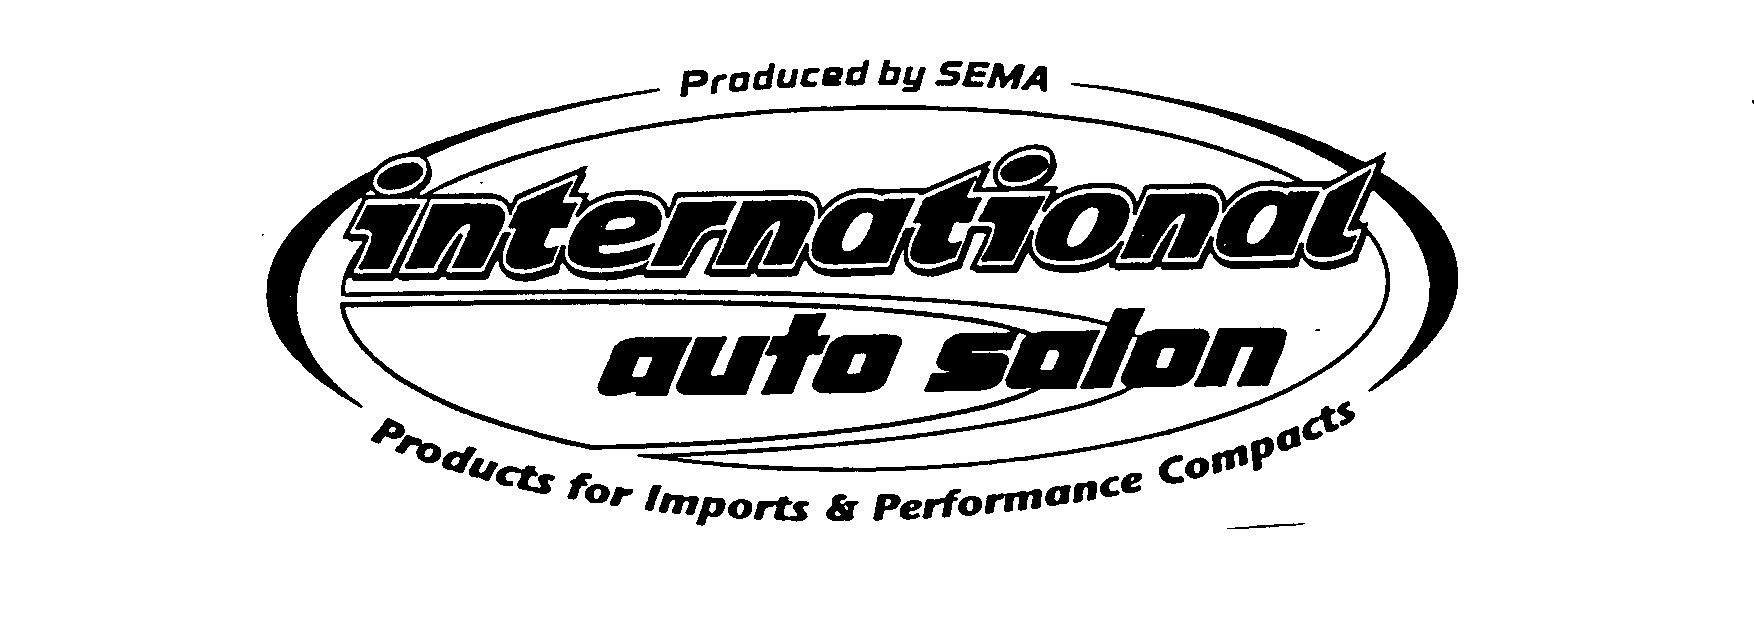 Trademark Logo PRODUCED BY SEMA INTERNATIONAL AUTO SALON PRODUCTS FOR IMPORTS & PERFORMANCE COMPACTS